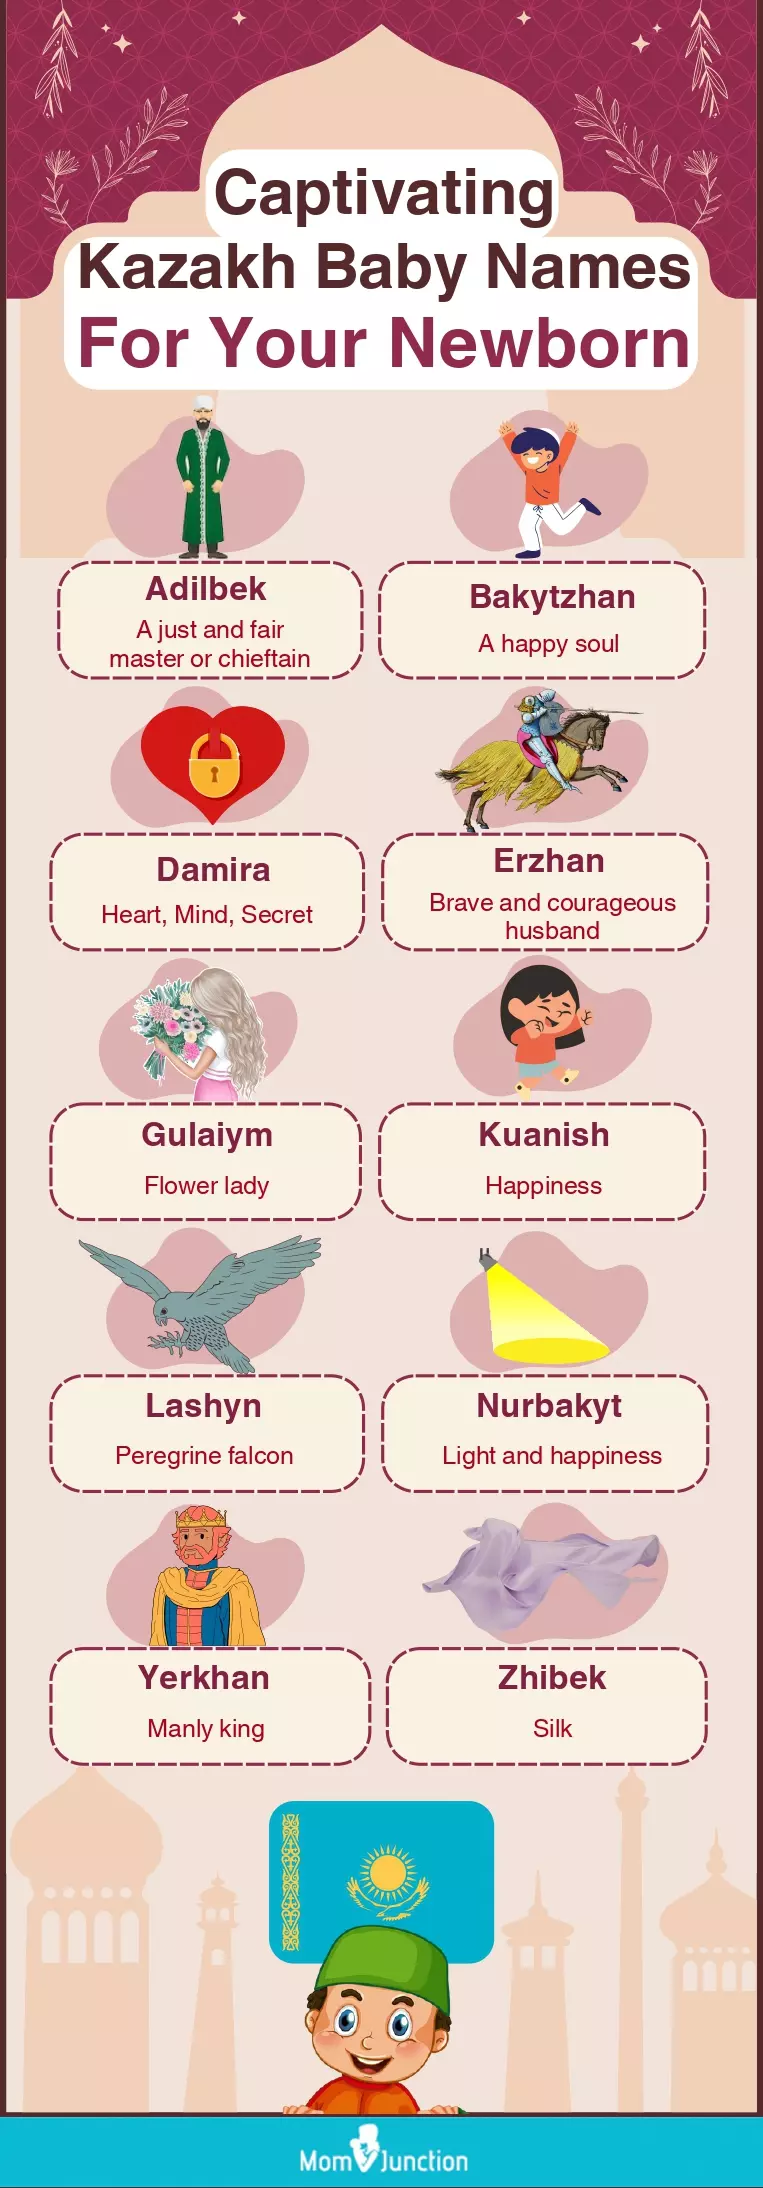 captivating kazakh baby names for your newborn (infographic)